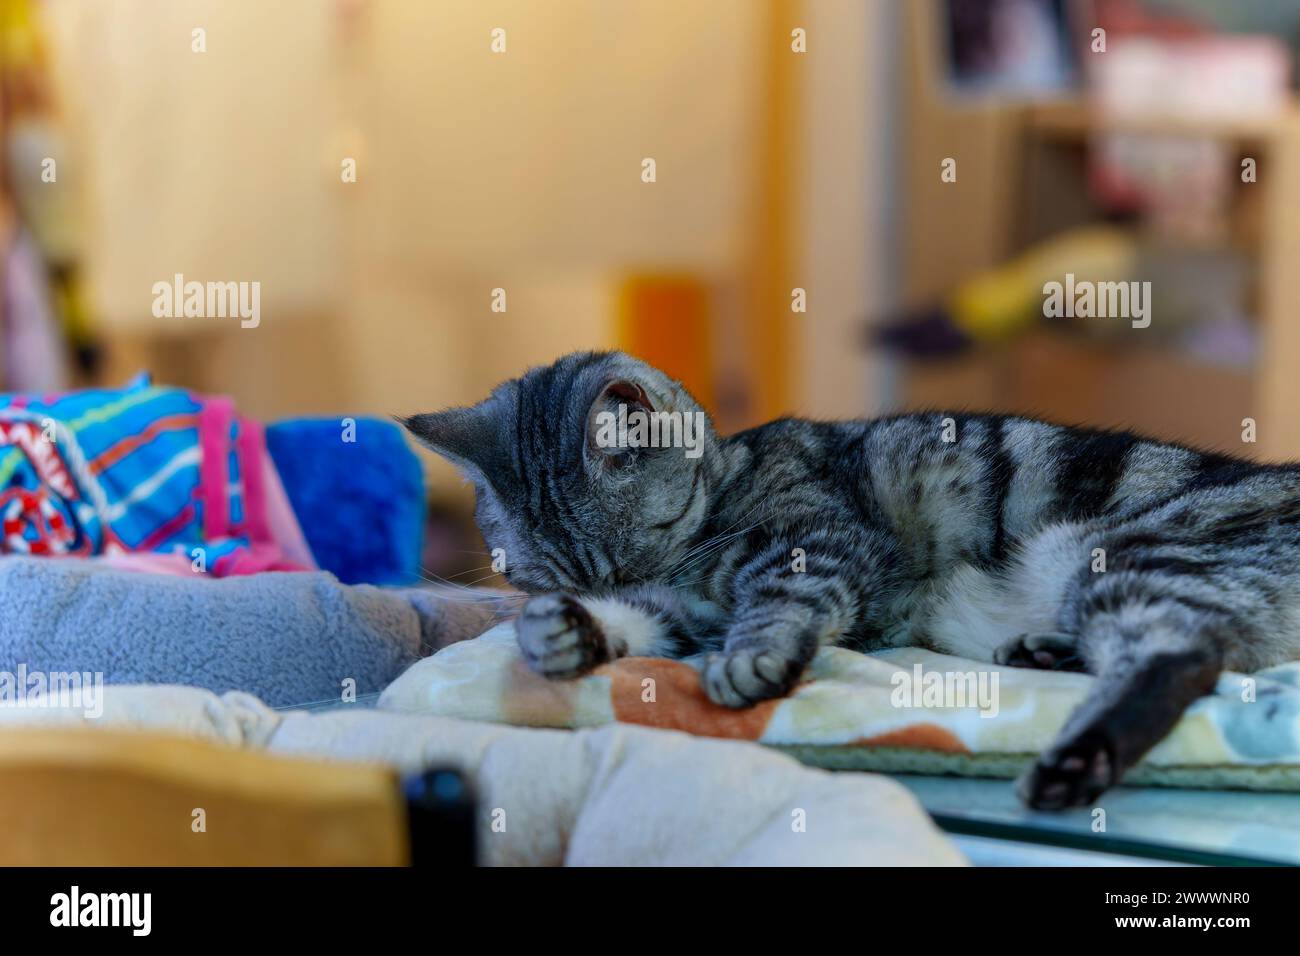 Cat sleeping on a table Stock Photo